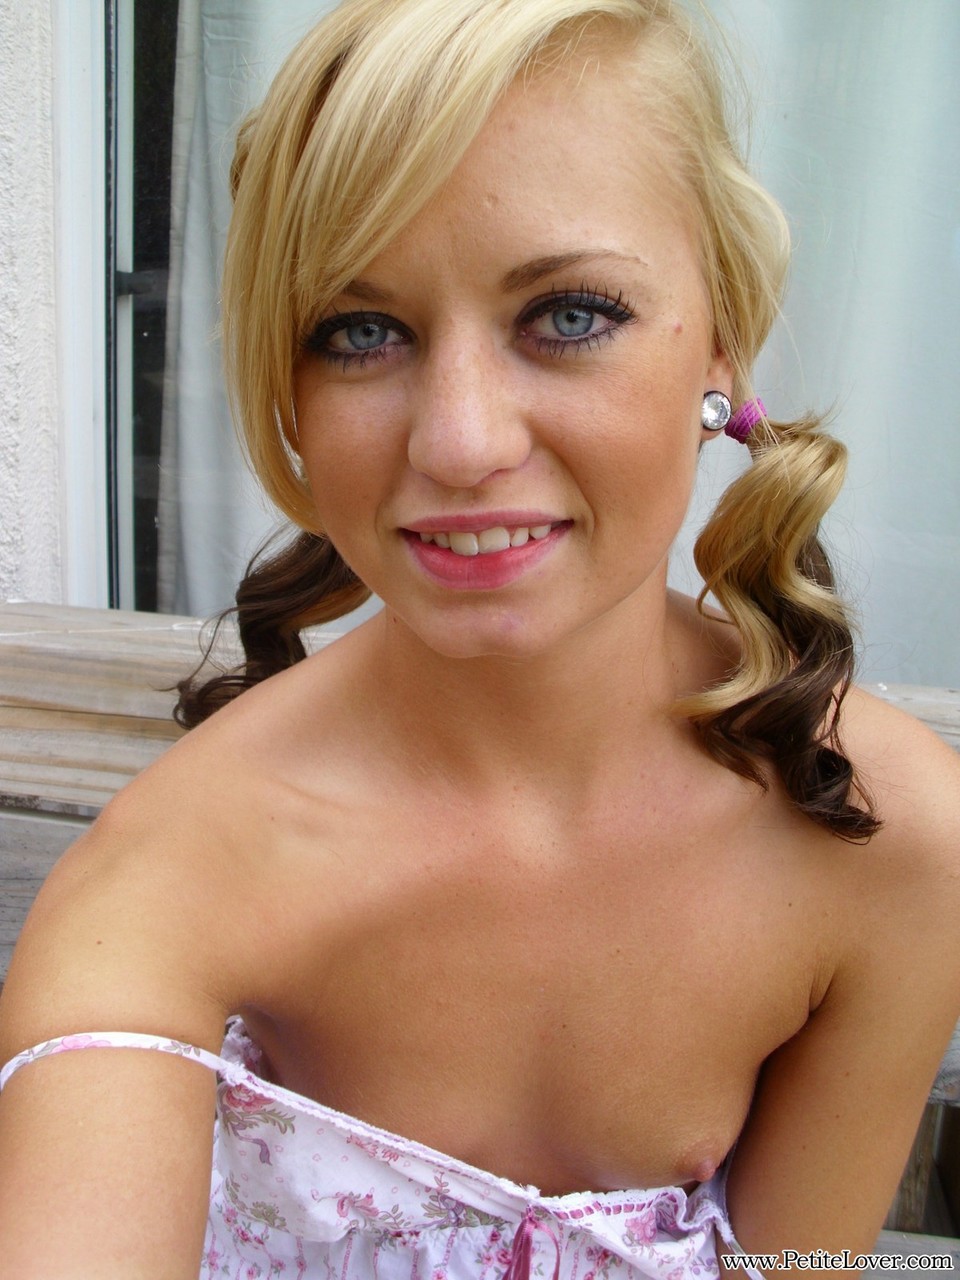 Cute blonde Tiff in pigtails showing off her wee small tits & tiny bald pussy porn photo #428478640